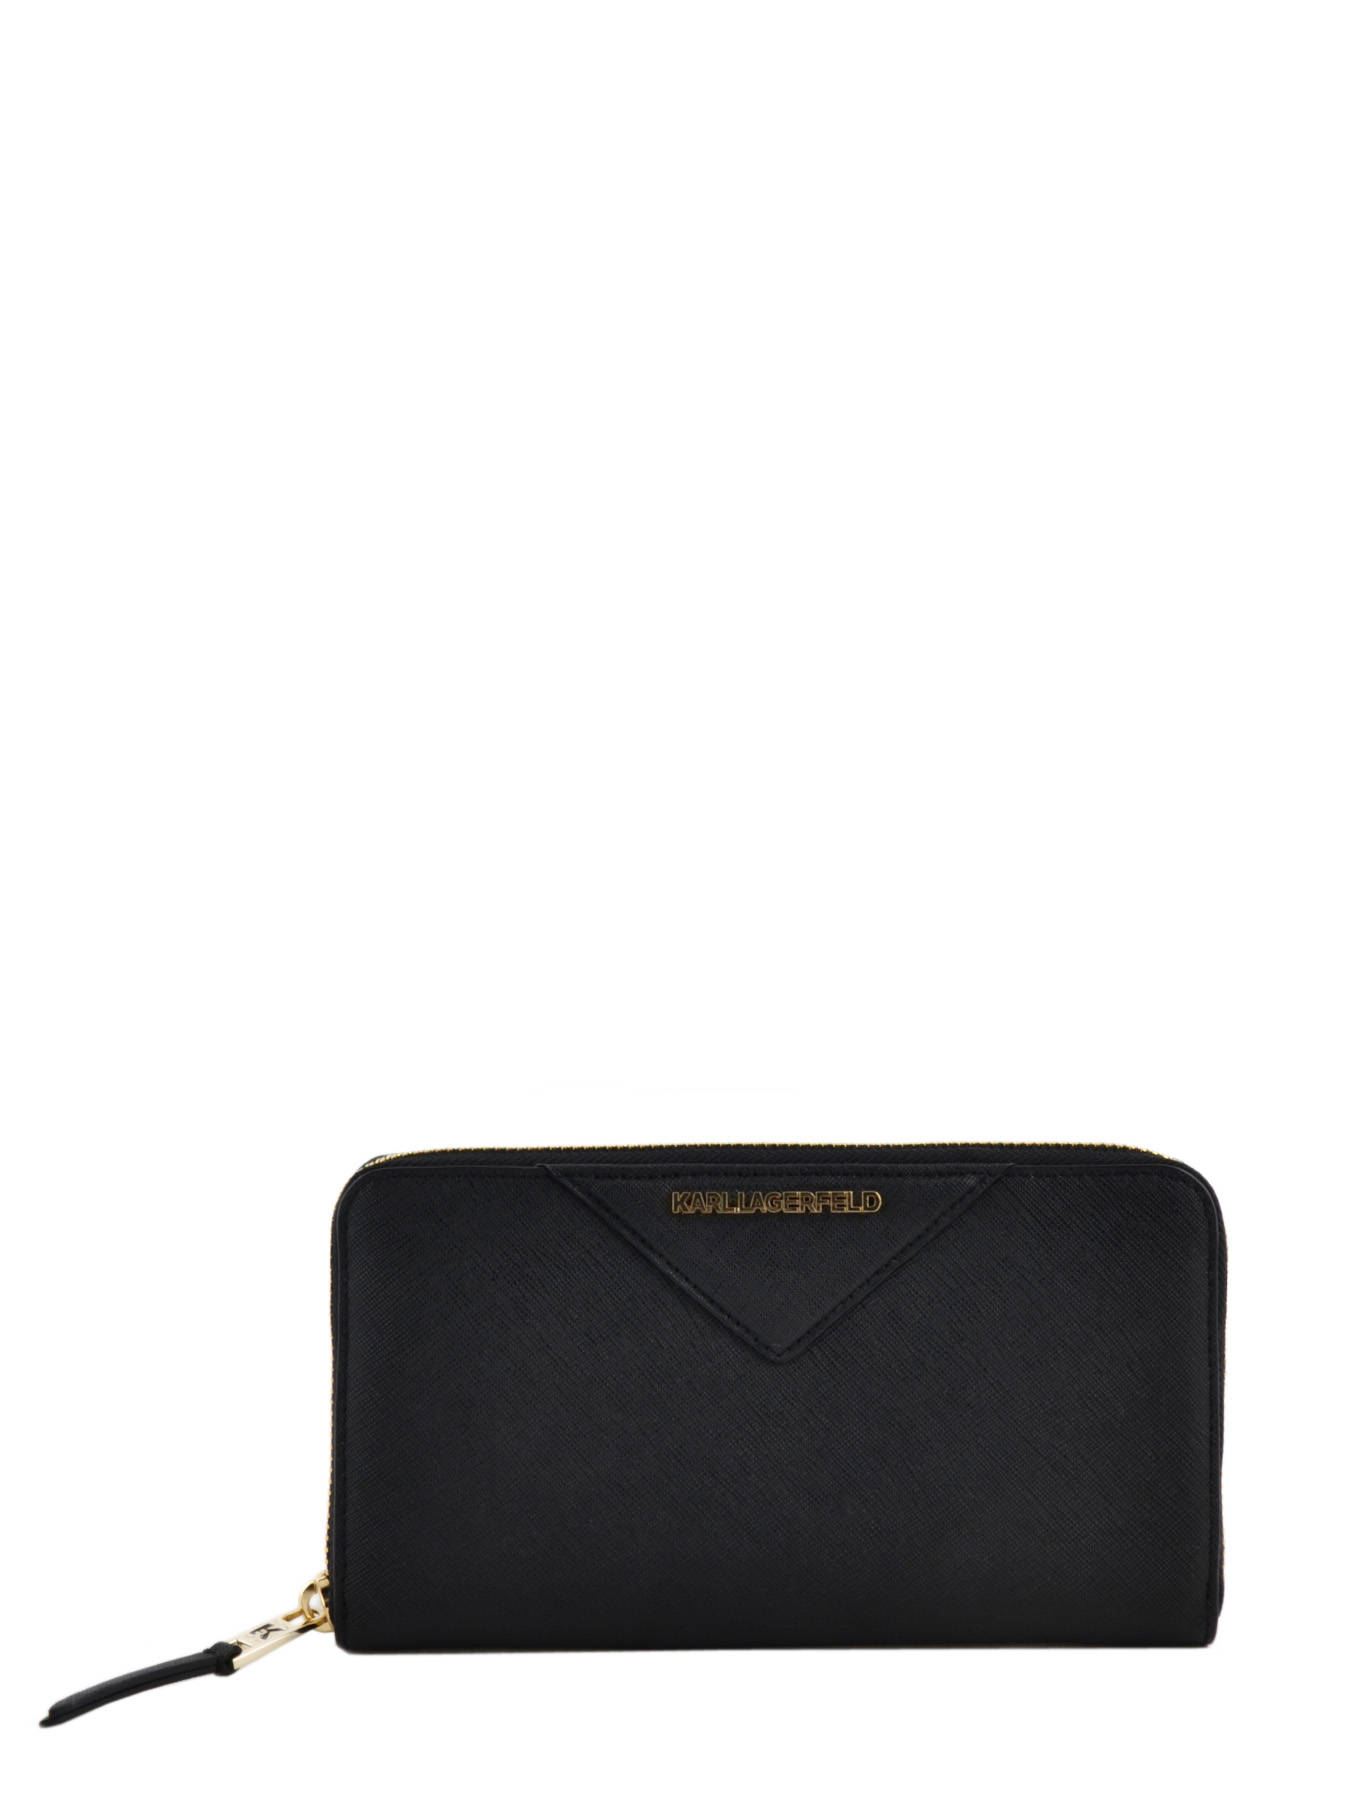 Karl Lagerfeld Wallet COKW0003 - free shipping available